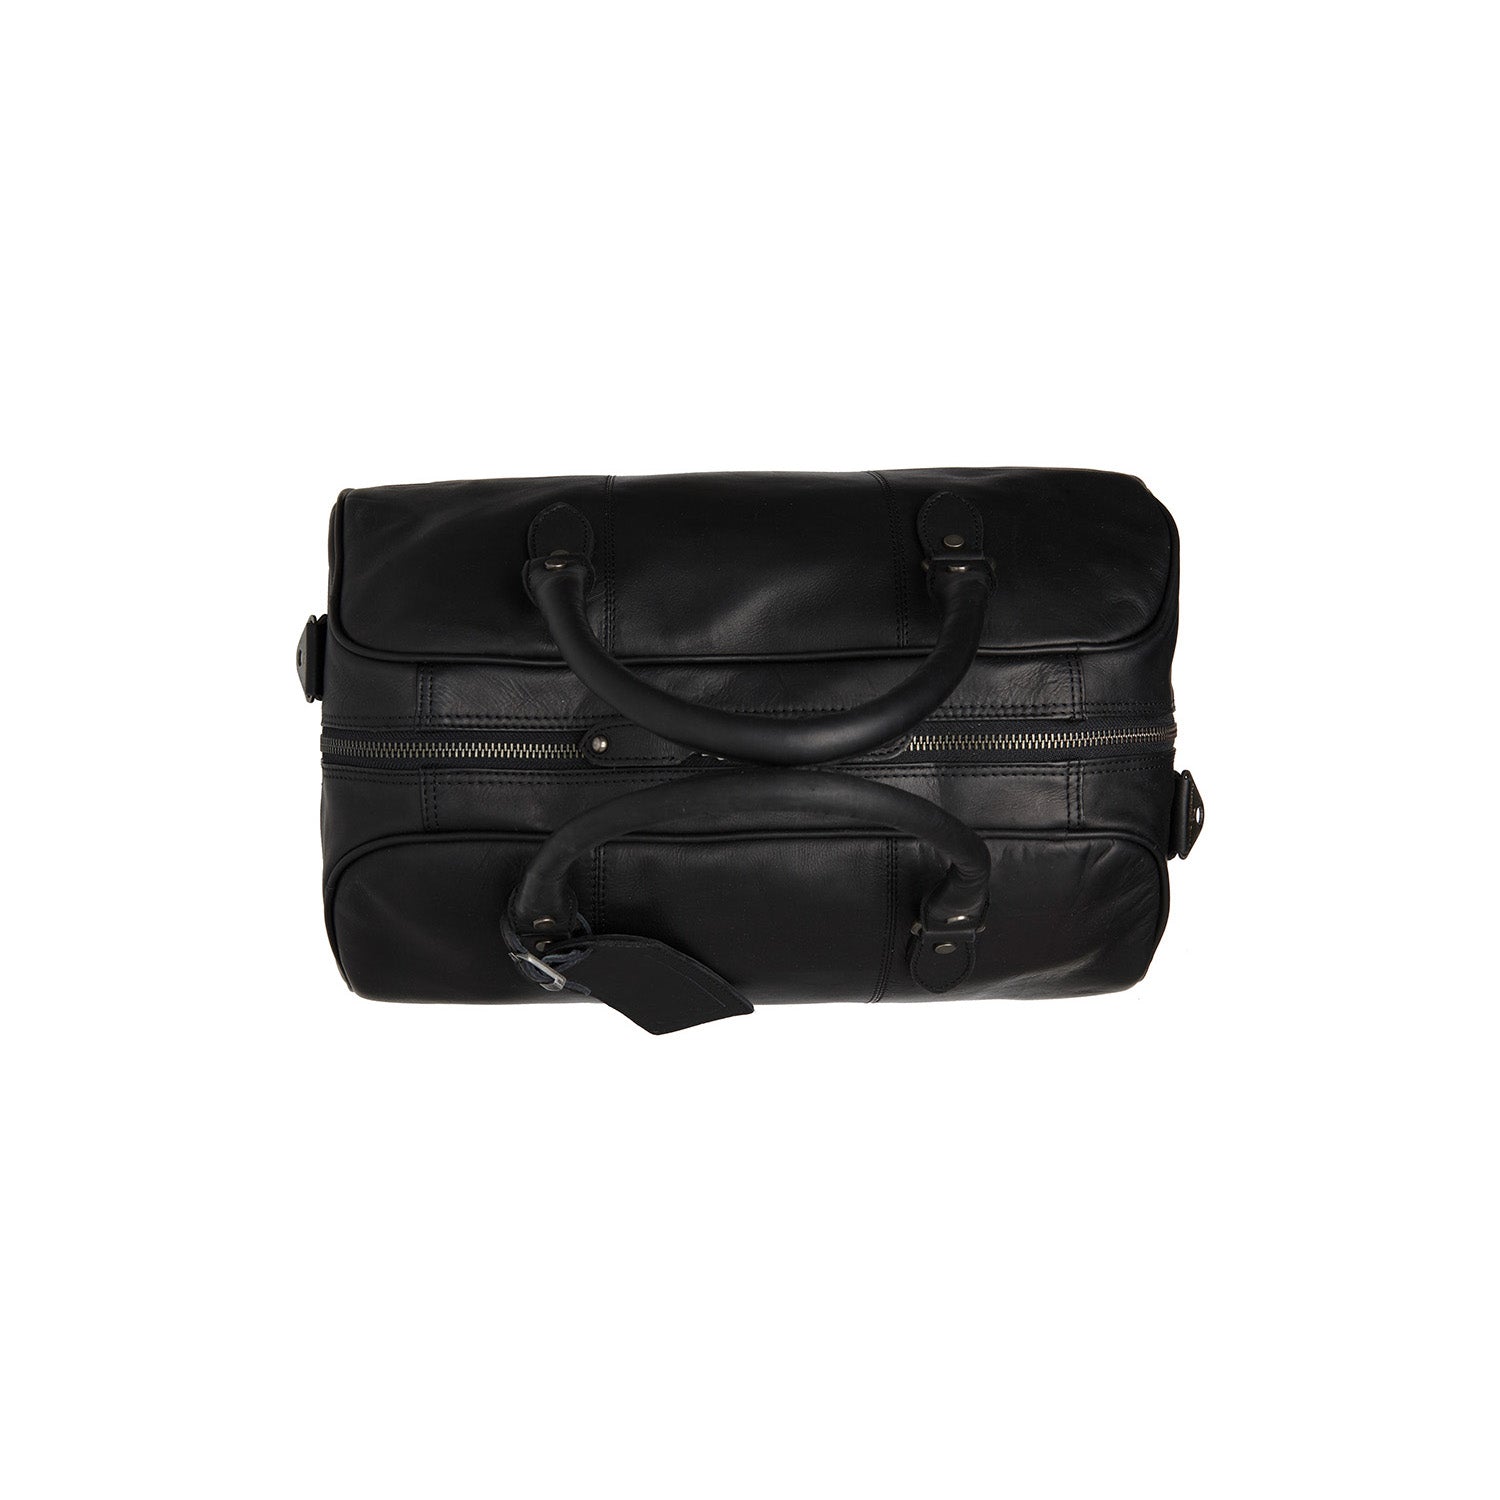 Leather Weekend Bag - The Chesterfield Brand Liam Black